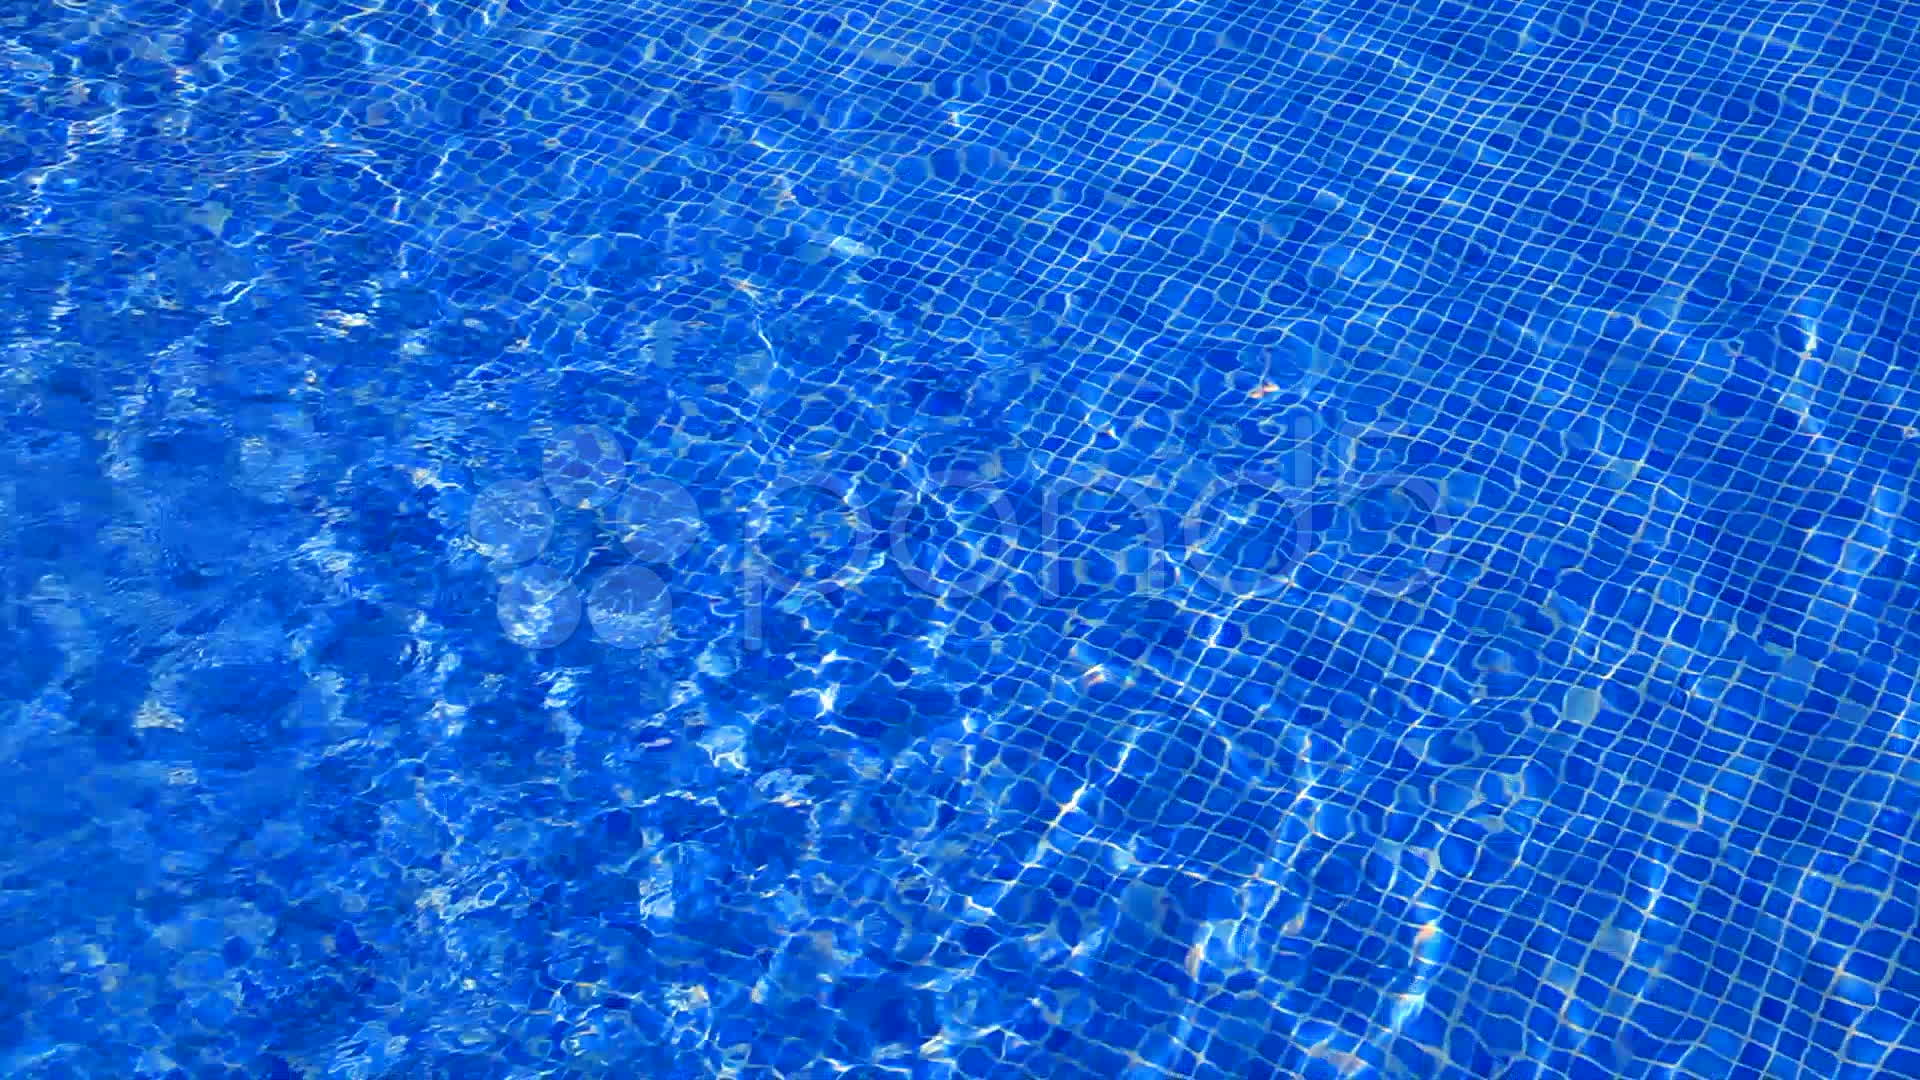 Blue Tiles Pool Water Reflection Ripple As A Summer Vacation Concept ...